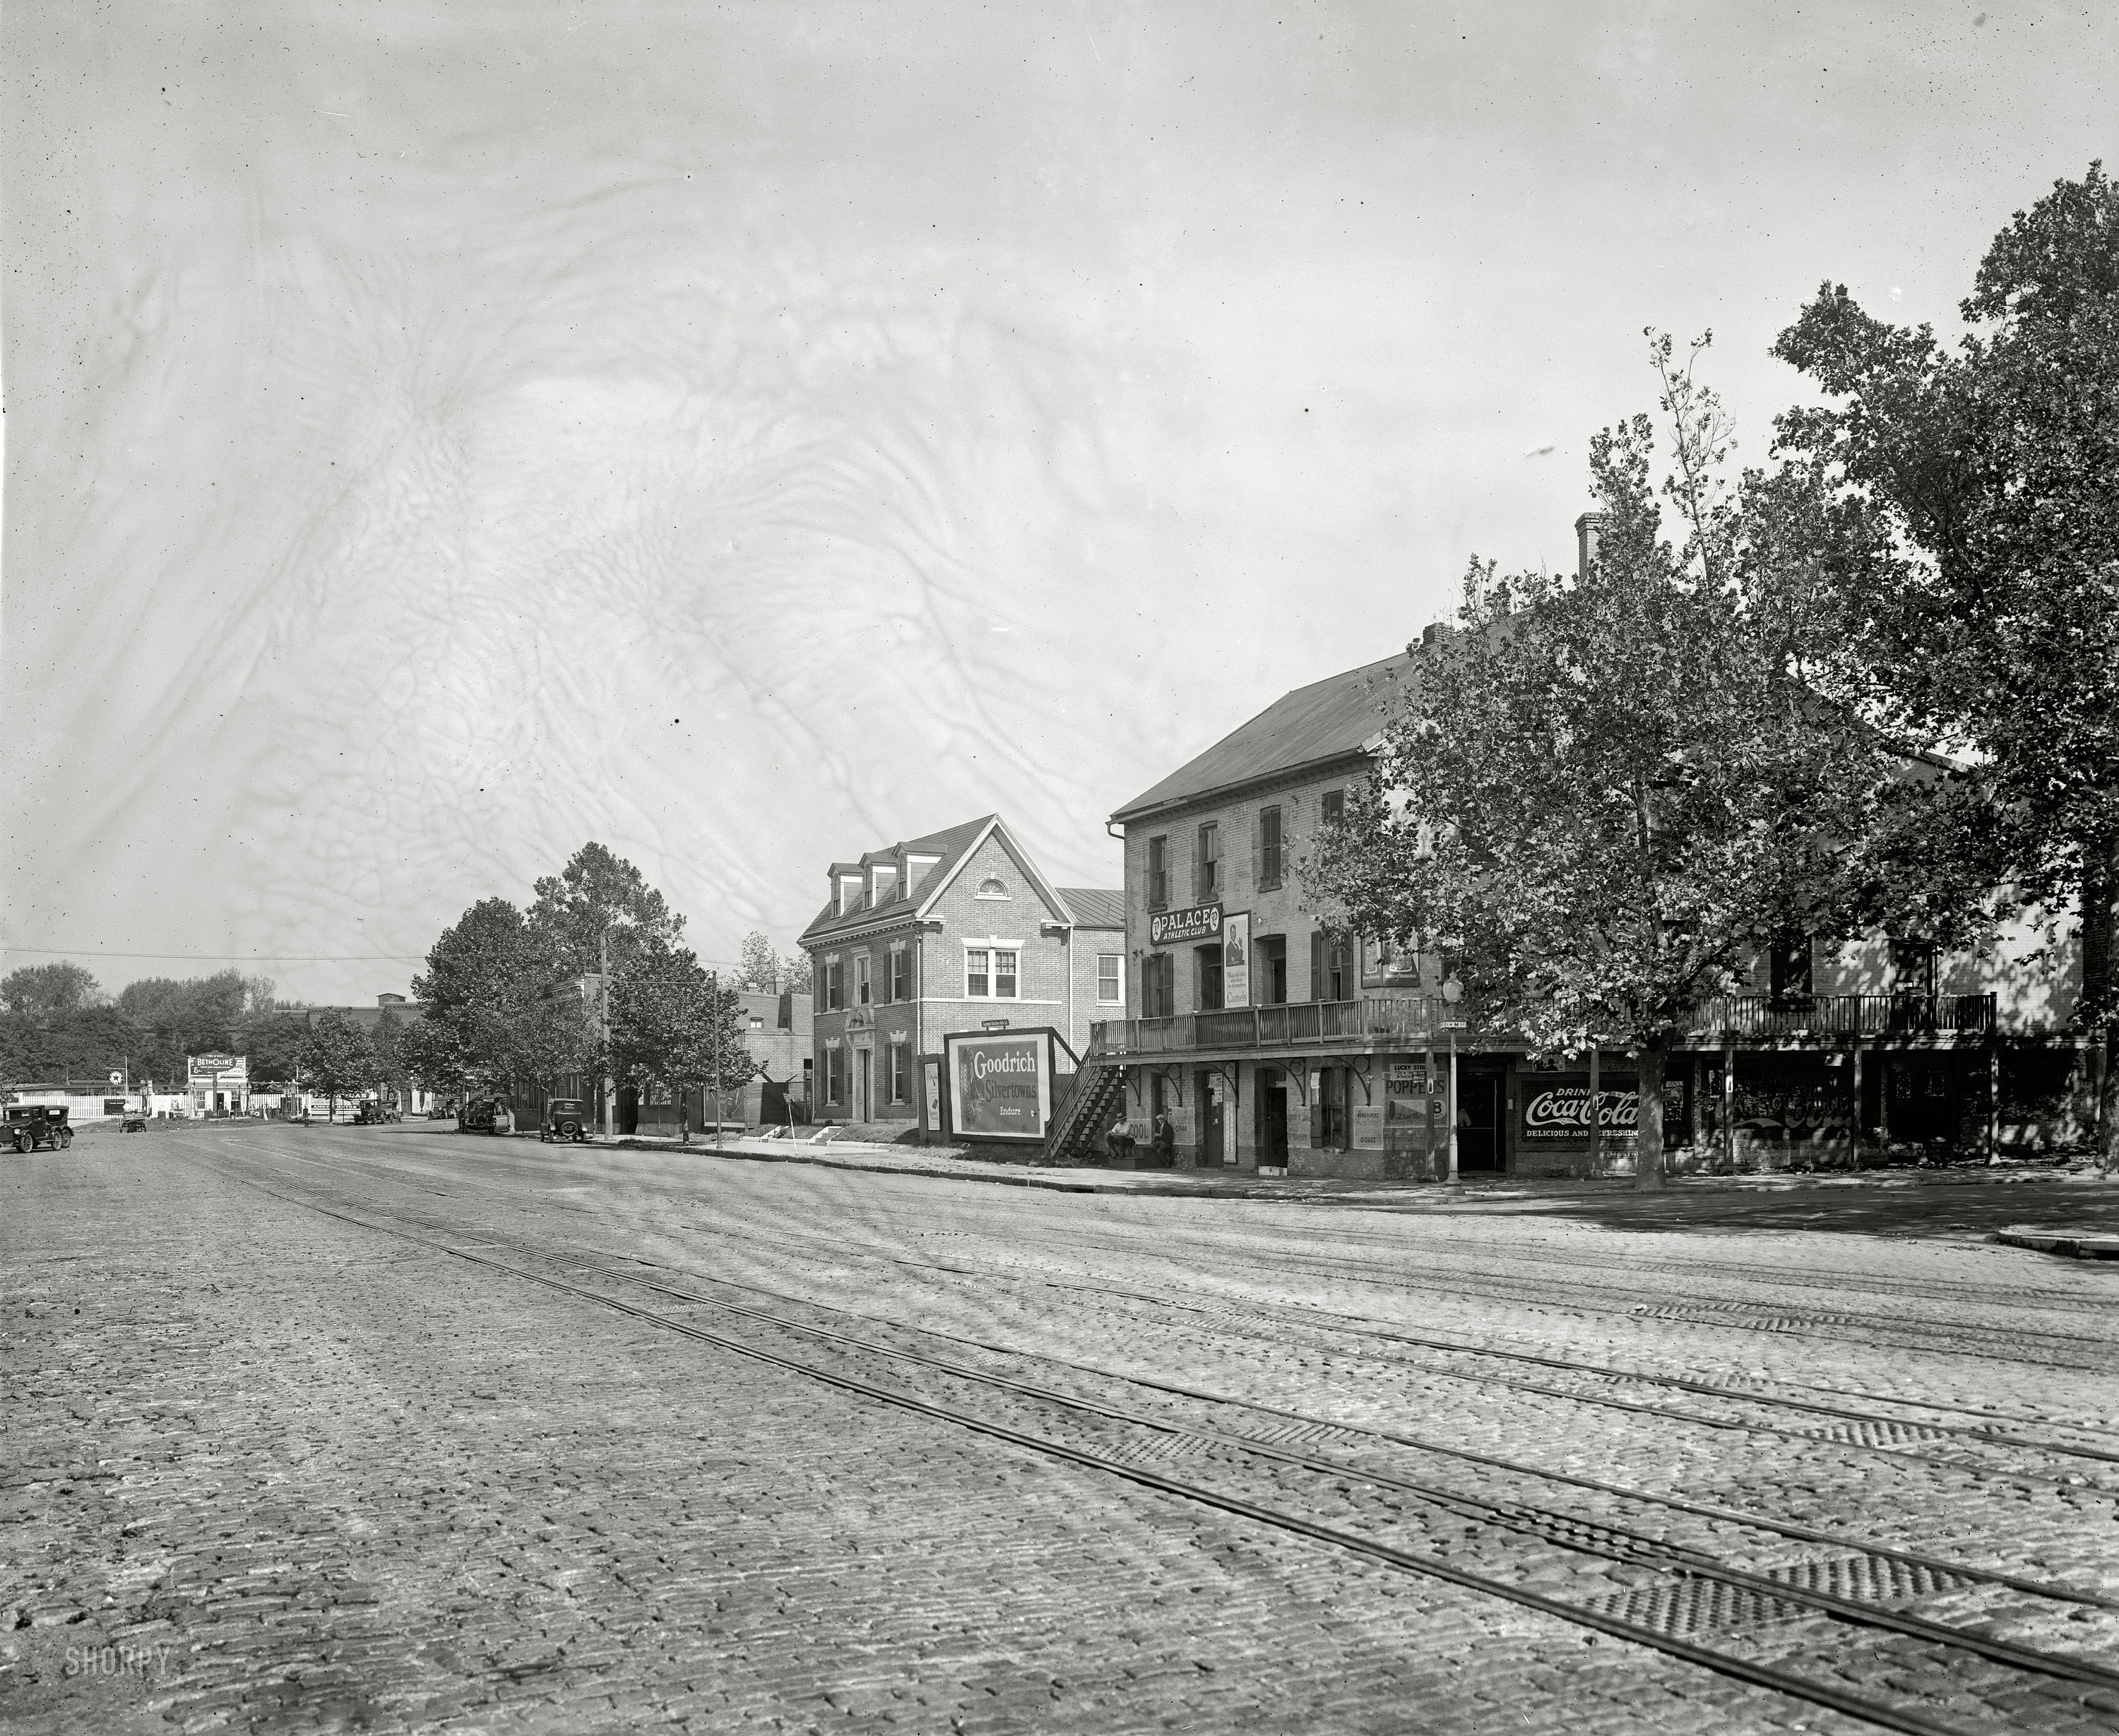 Washington circa 1927. "Harry Wardman Co. Old house, Water & M streets S.W." Lots of old signage here: Palace Athletic Club, a tire billboard, Coca-Cola, Betholine and more. National Photo Company glass negative. View full size.